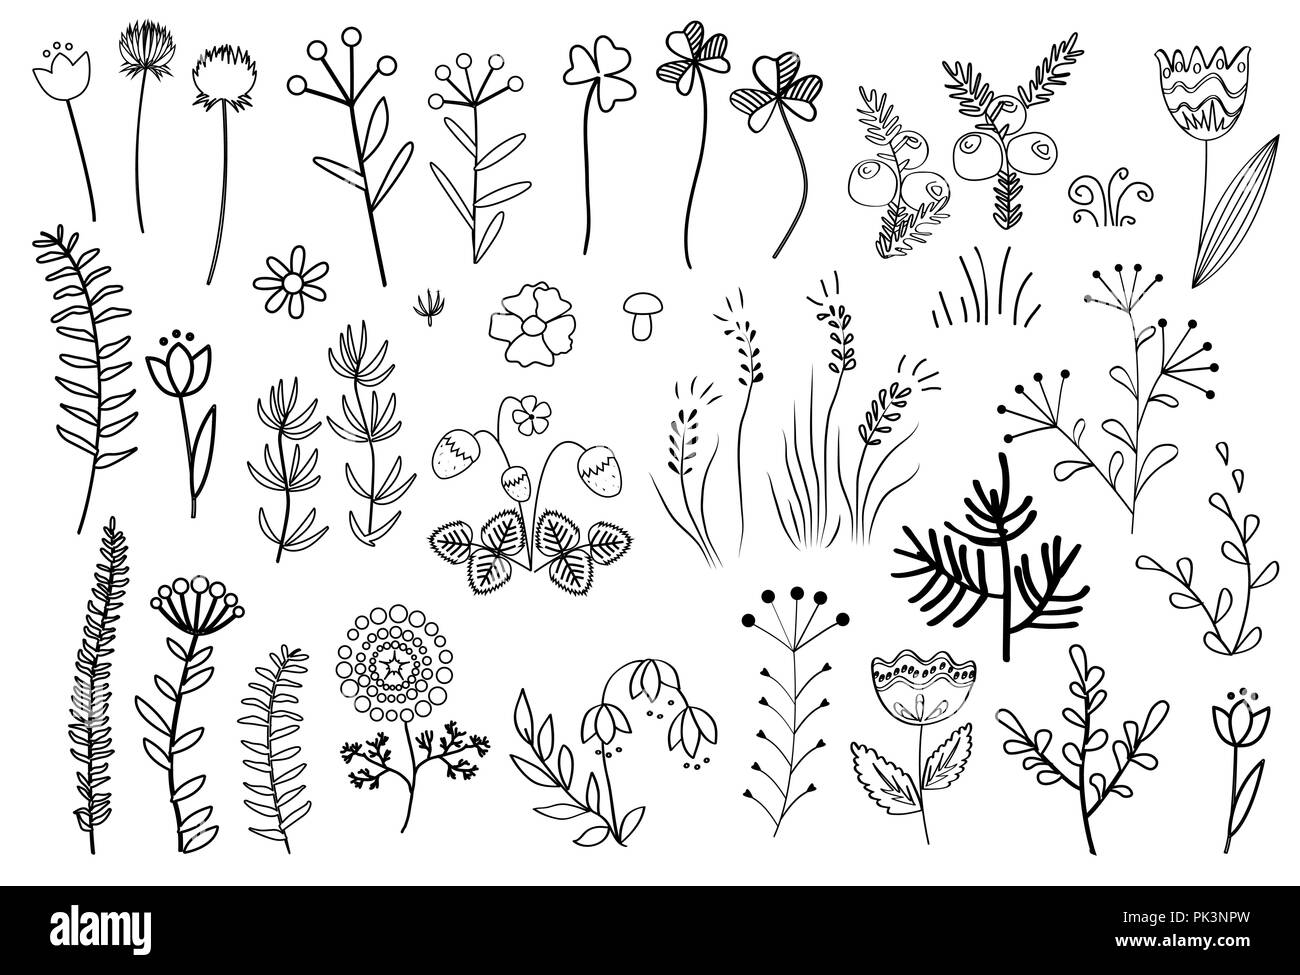 Floral graphic Black and White Stock Photos & Images - Alamy